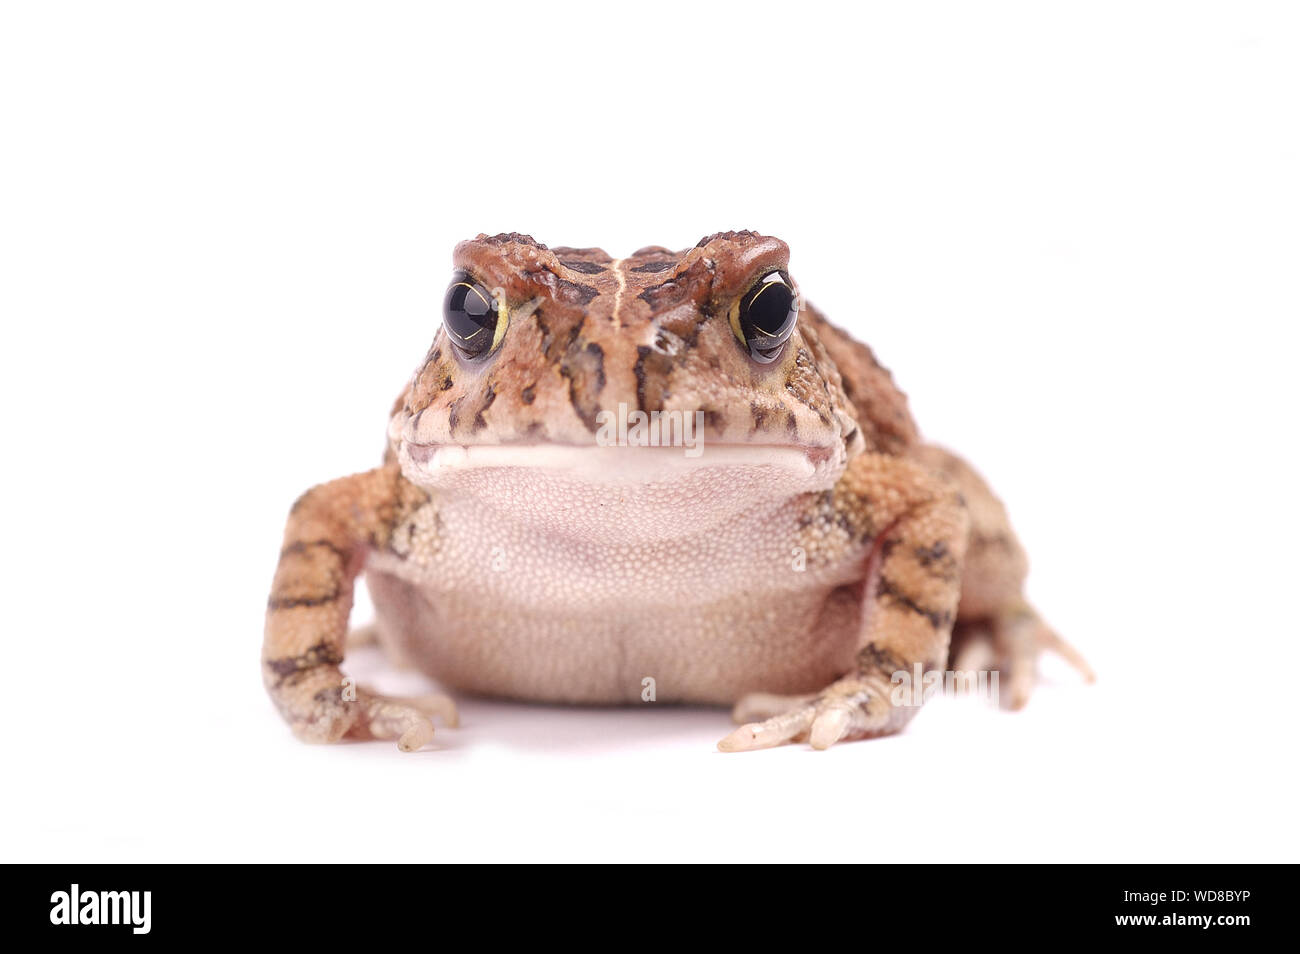 Full frontal of a toad isolated on a white background. Stock Photo